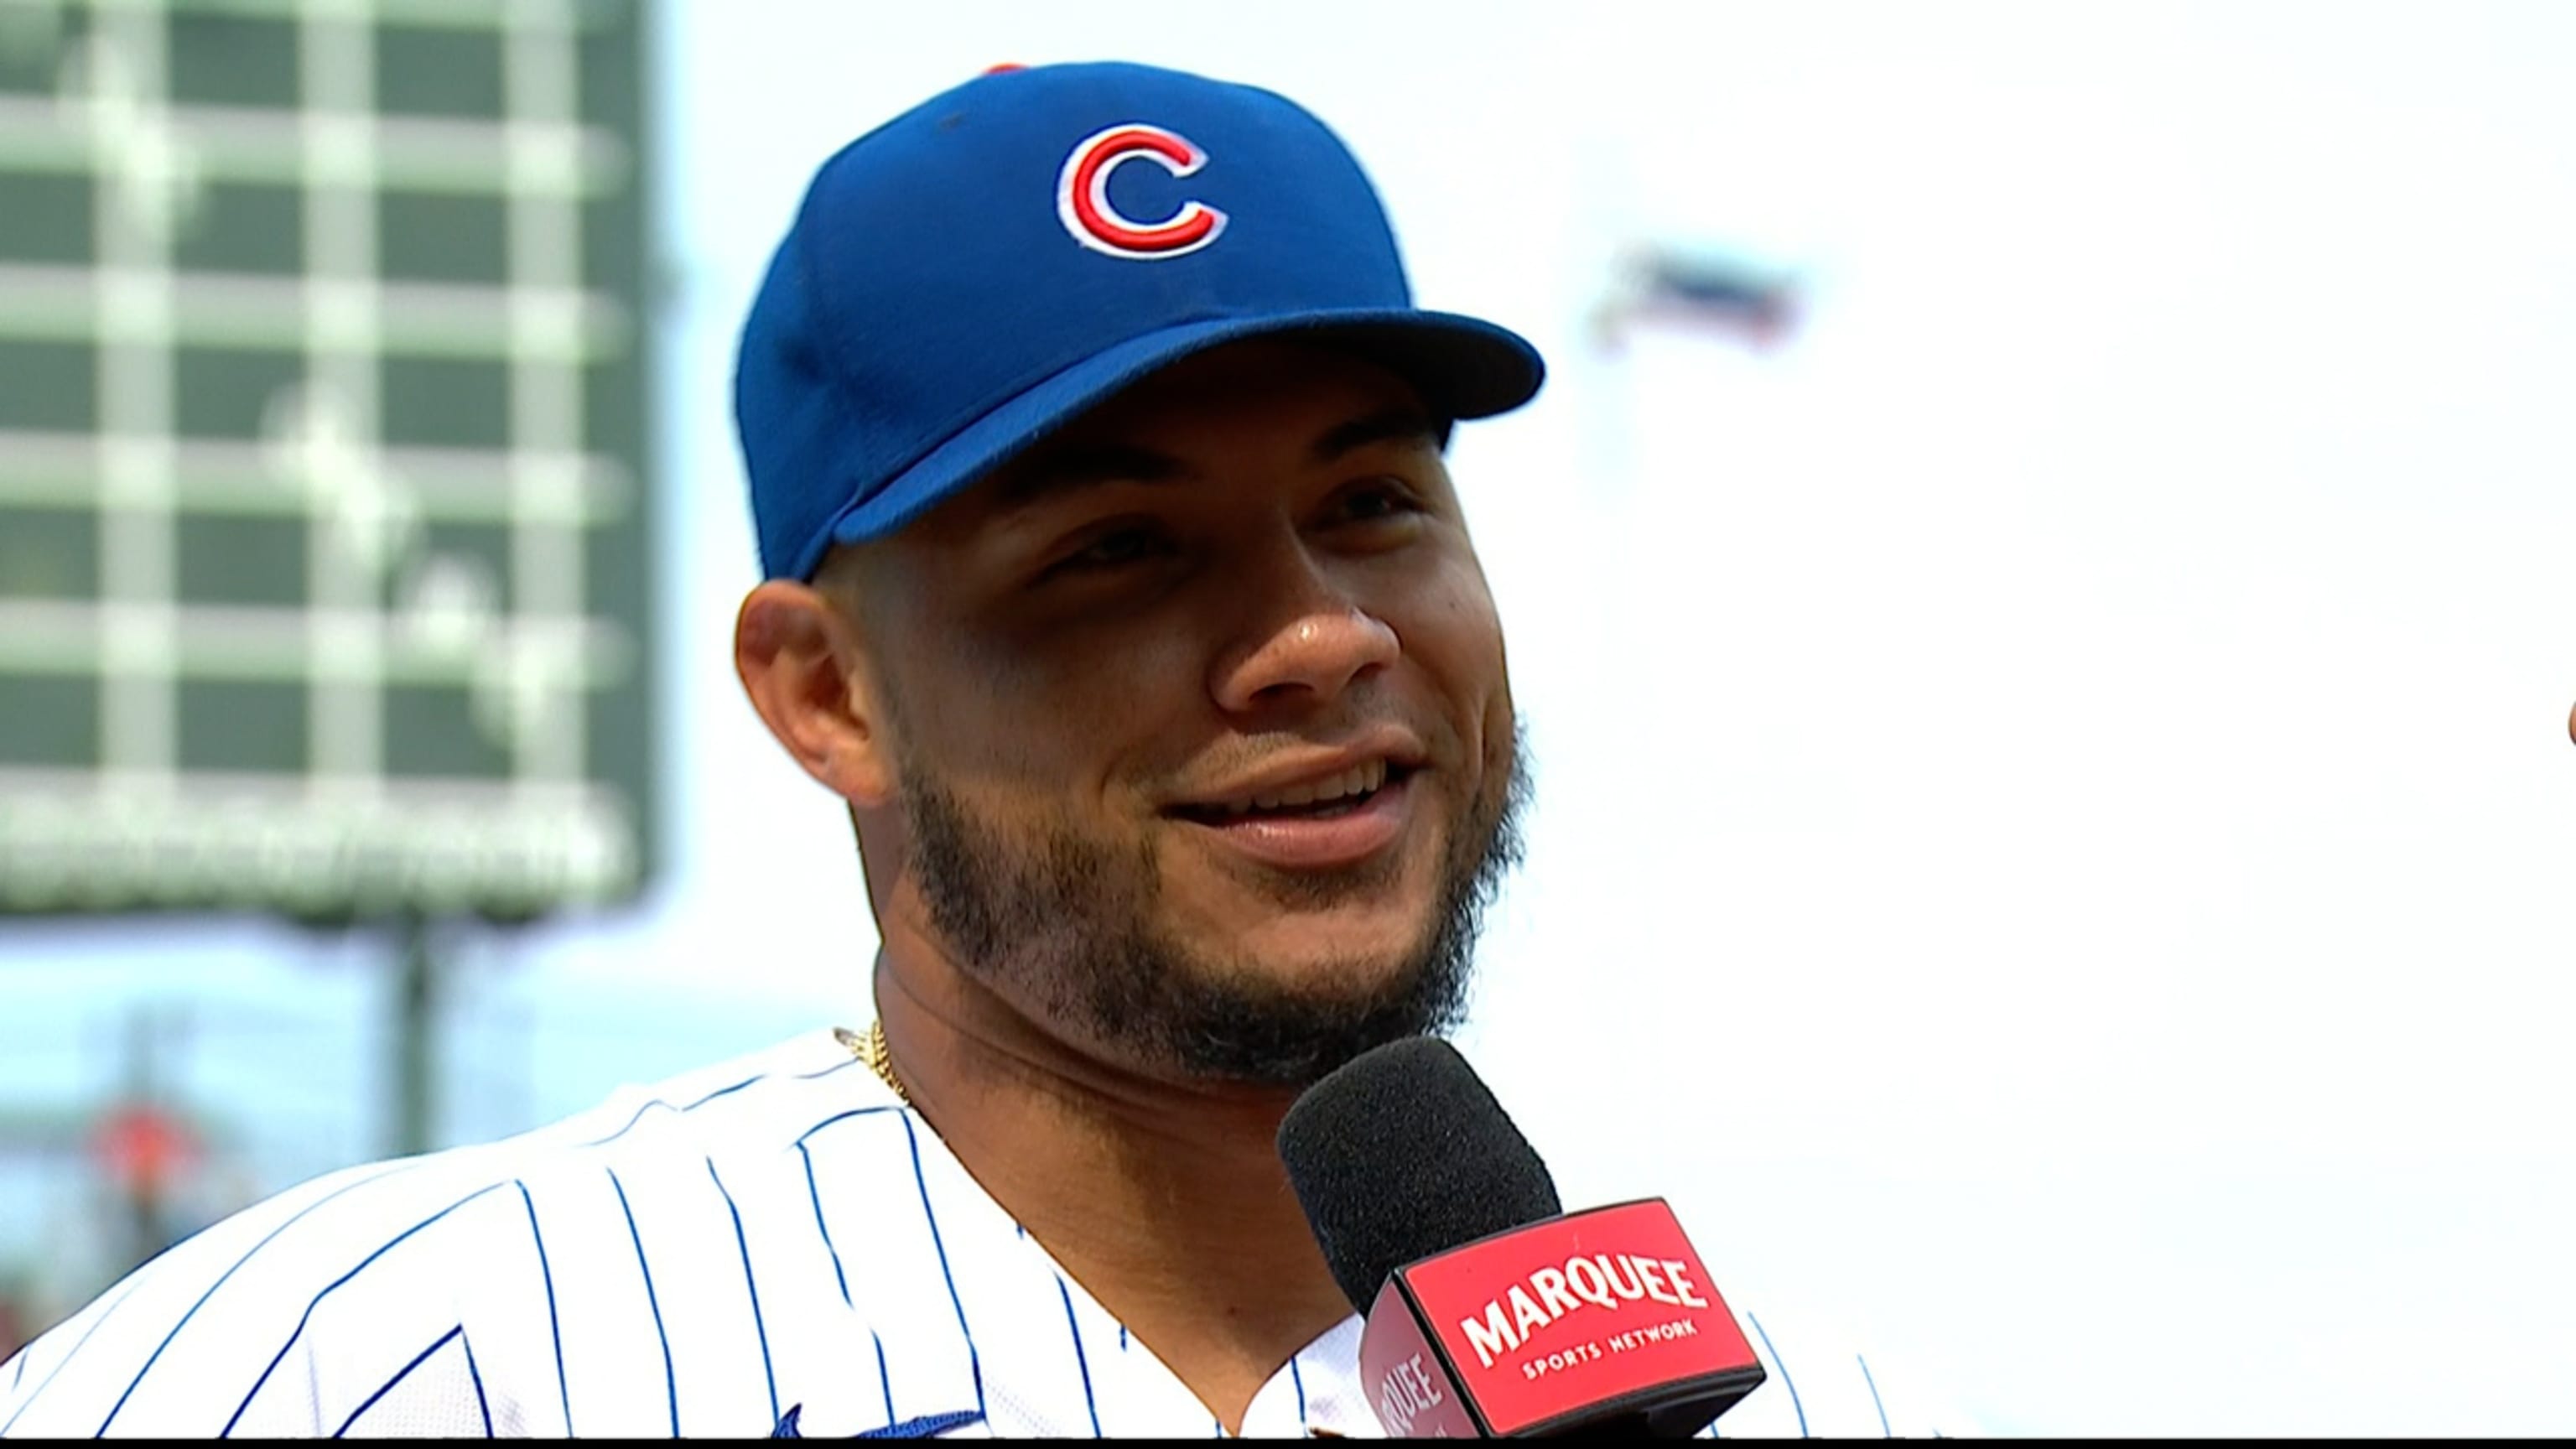 Willson Contreras embraces 'The Cardinals Way' as fans embrace him